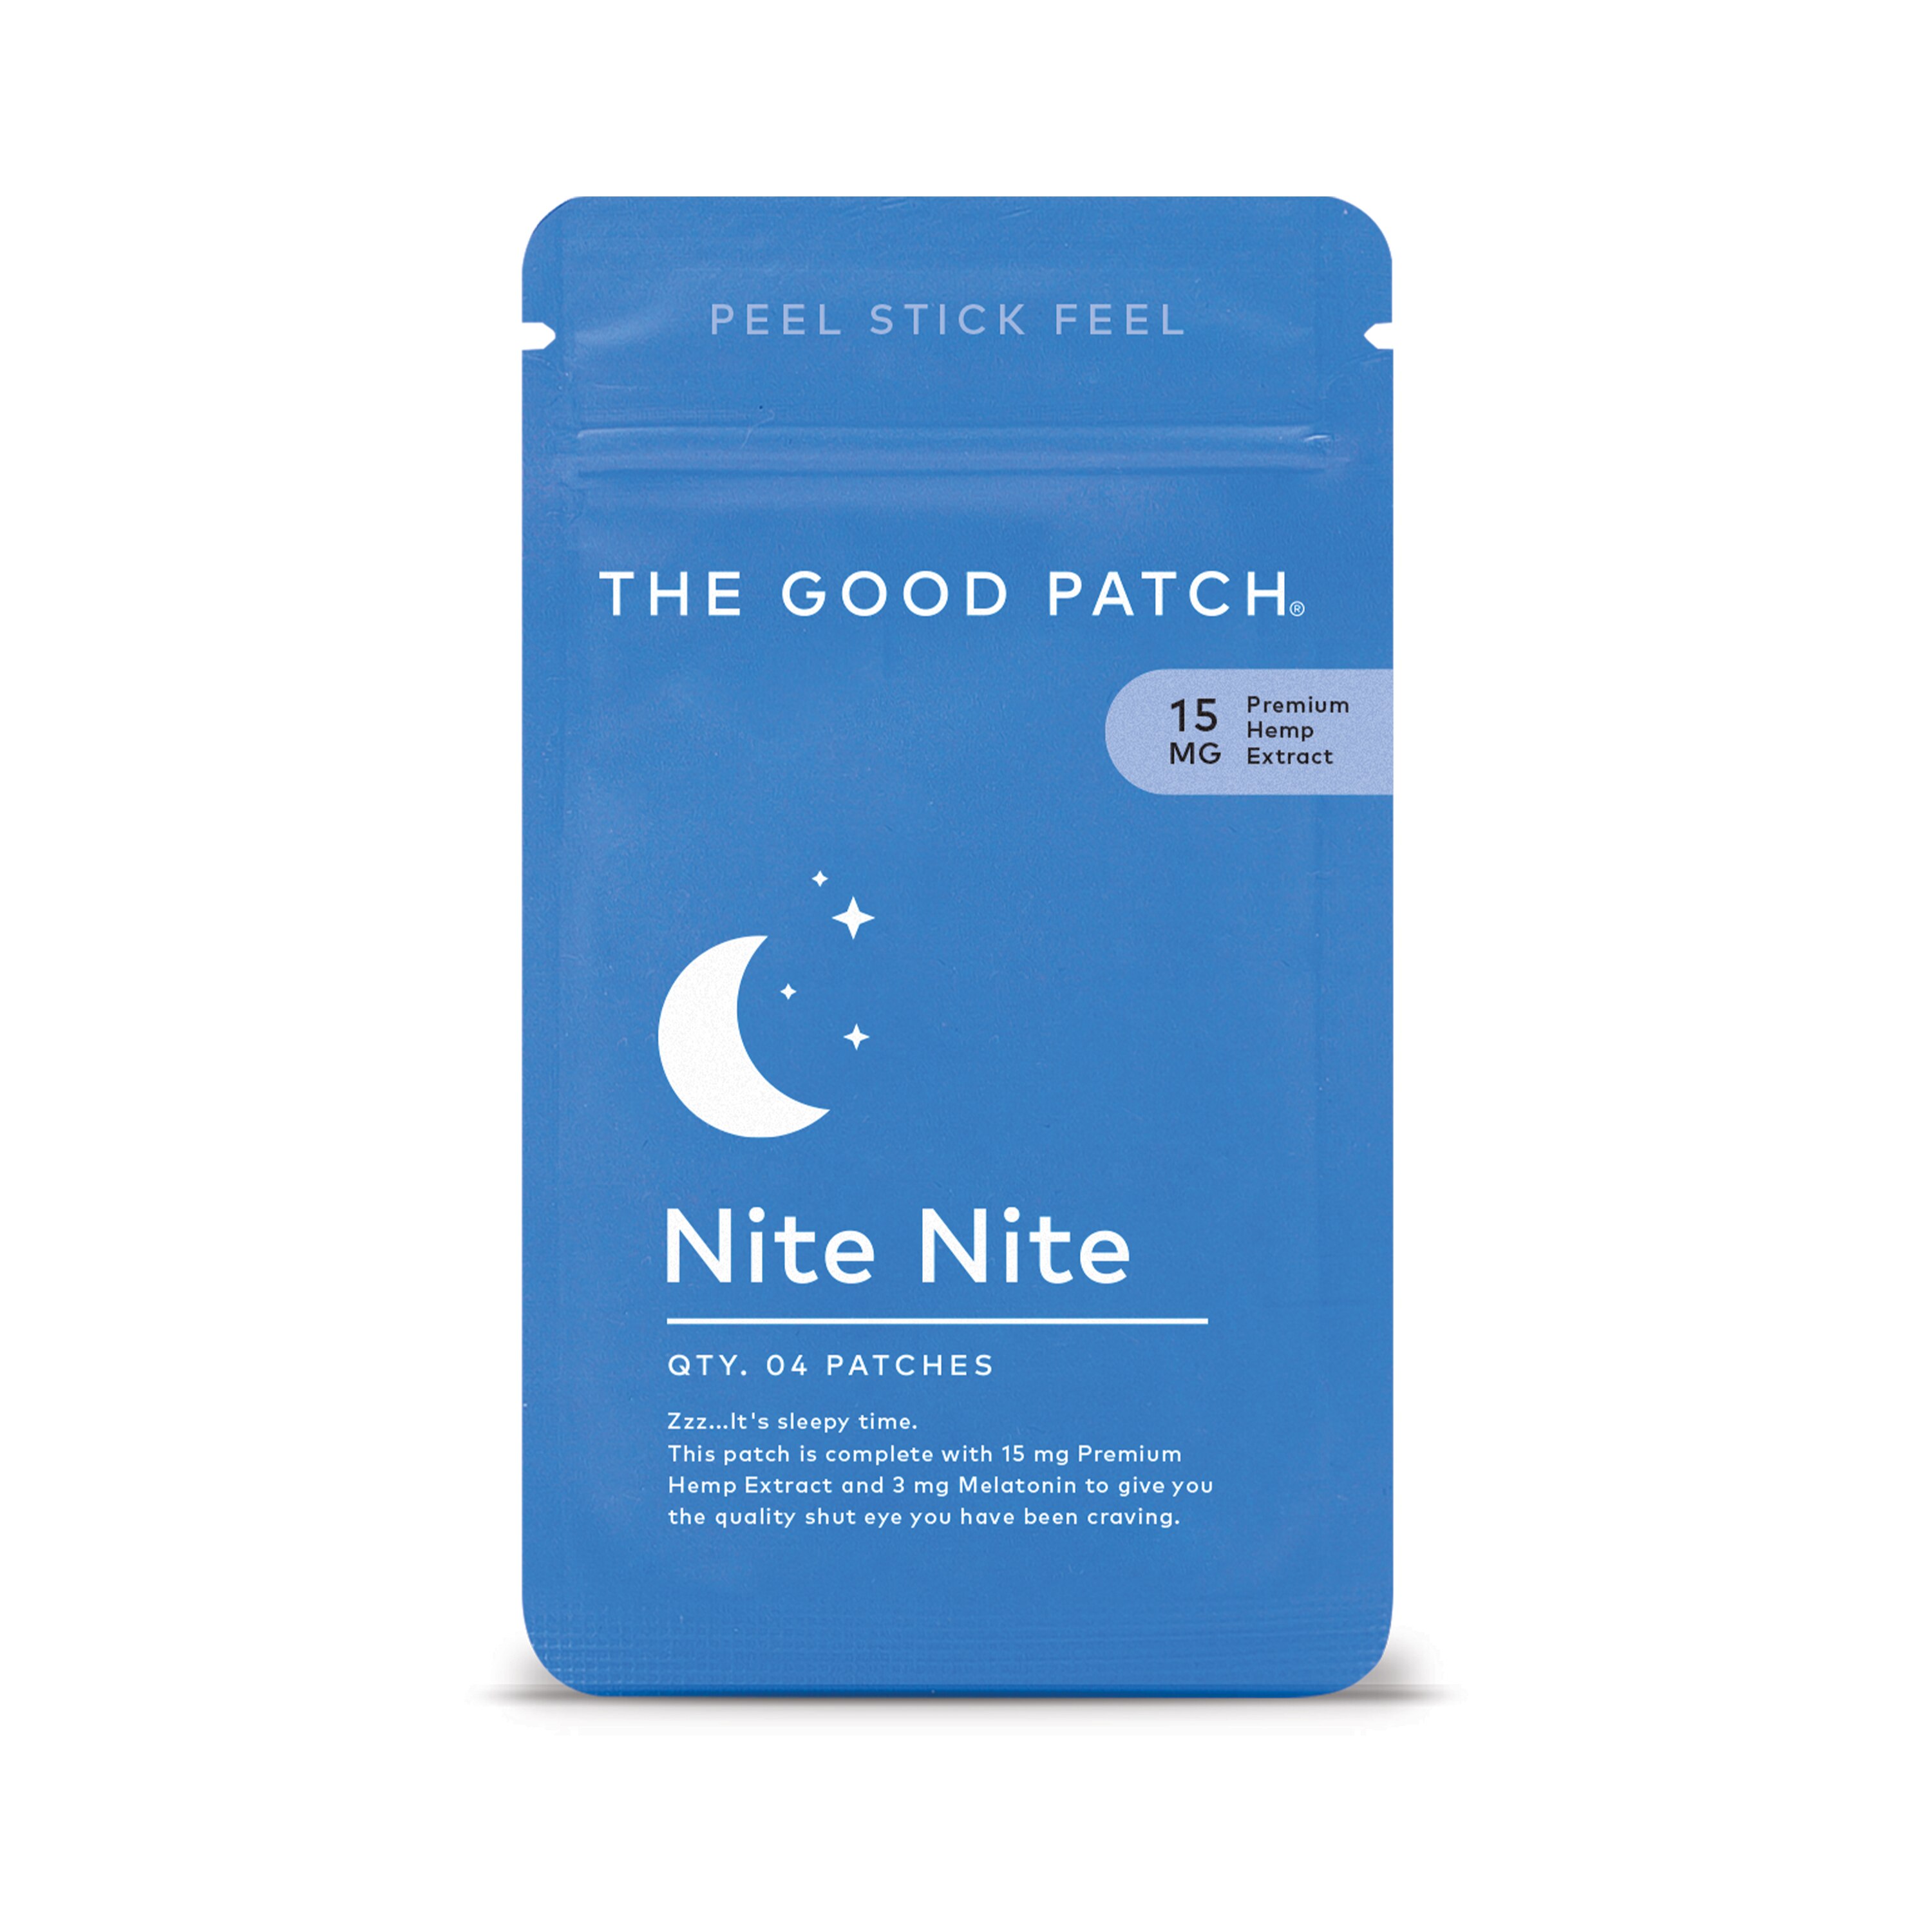 Thoughts on The Good Patch? : r/Ulta